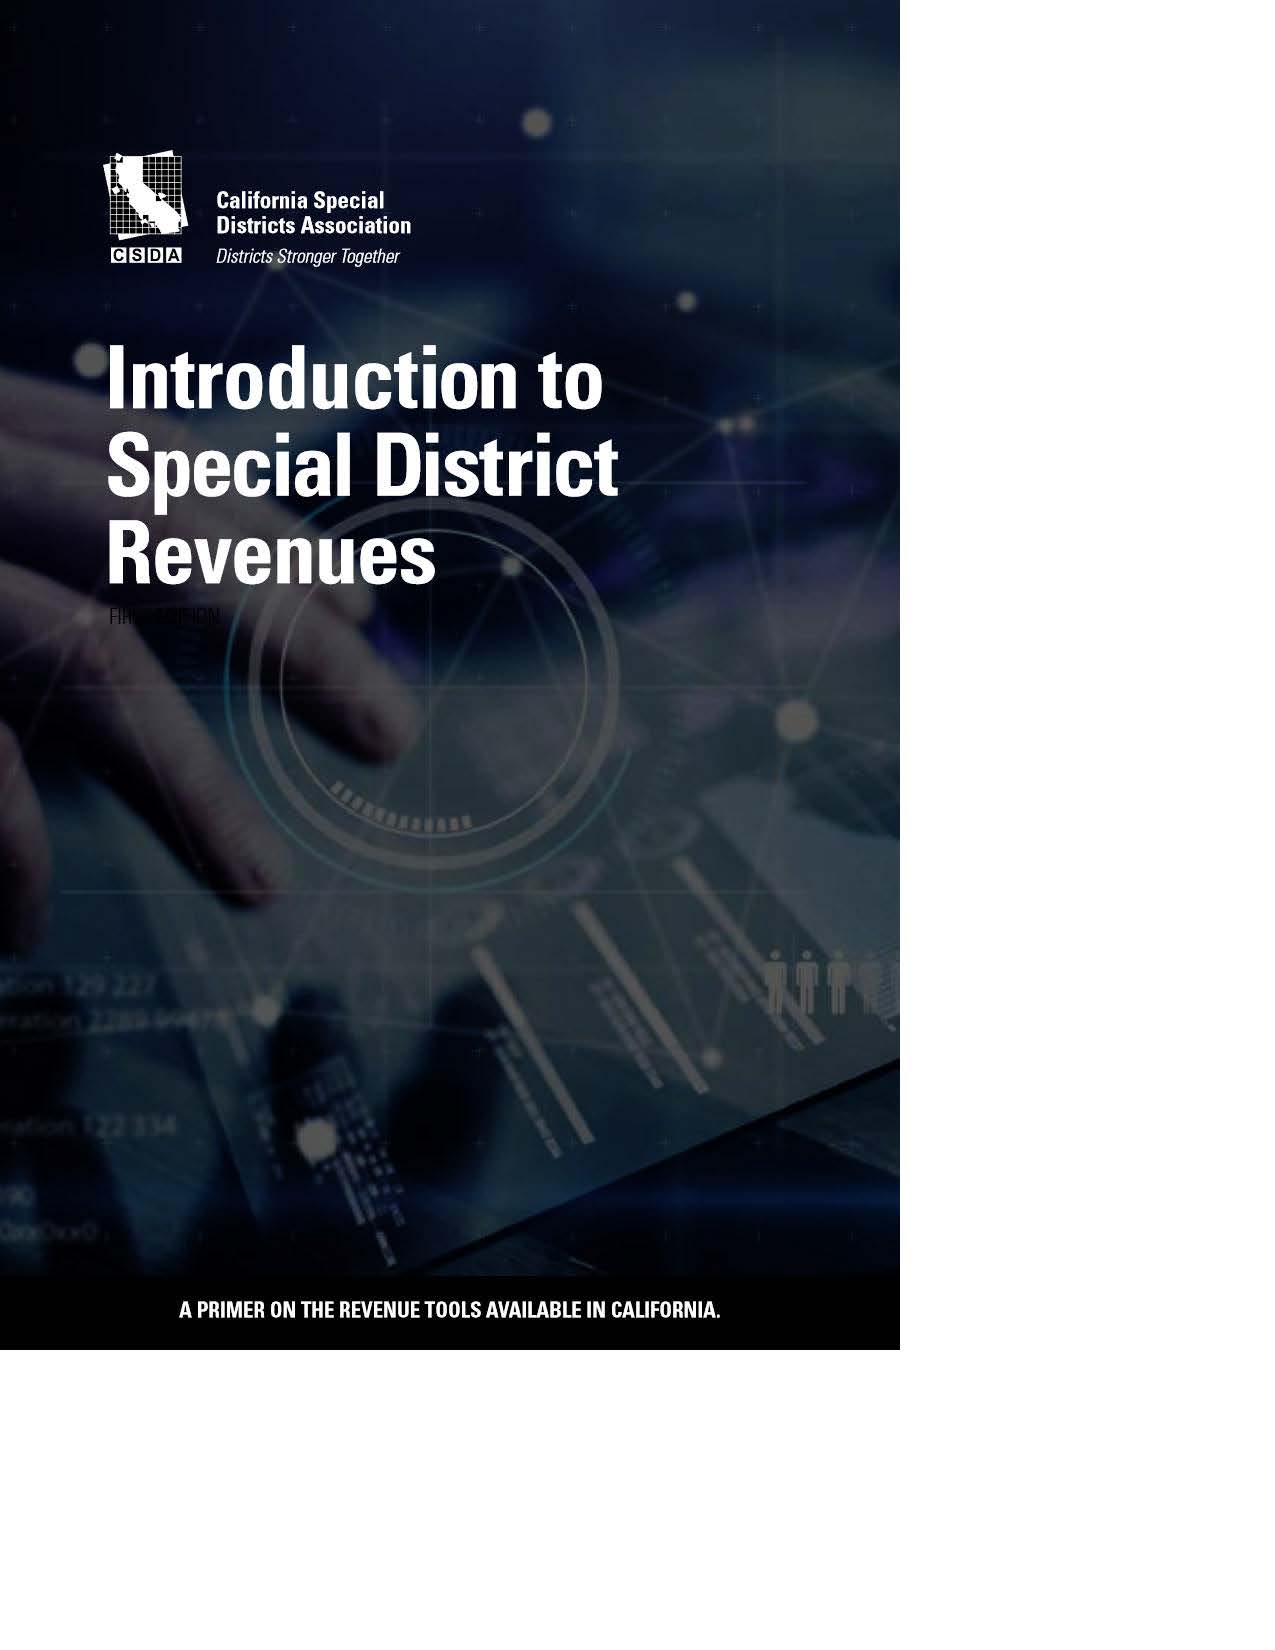 Introduction to Special District Revenues